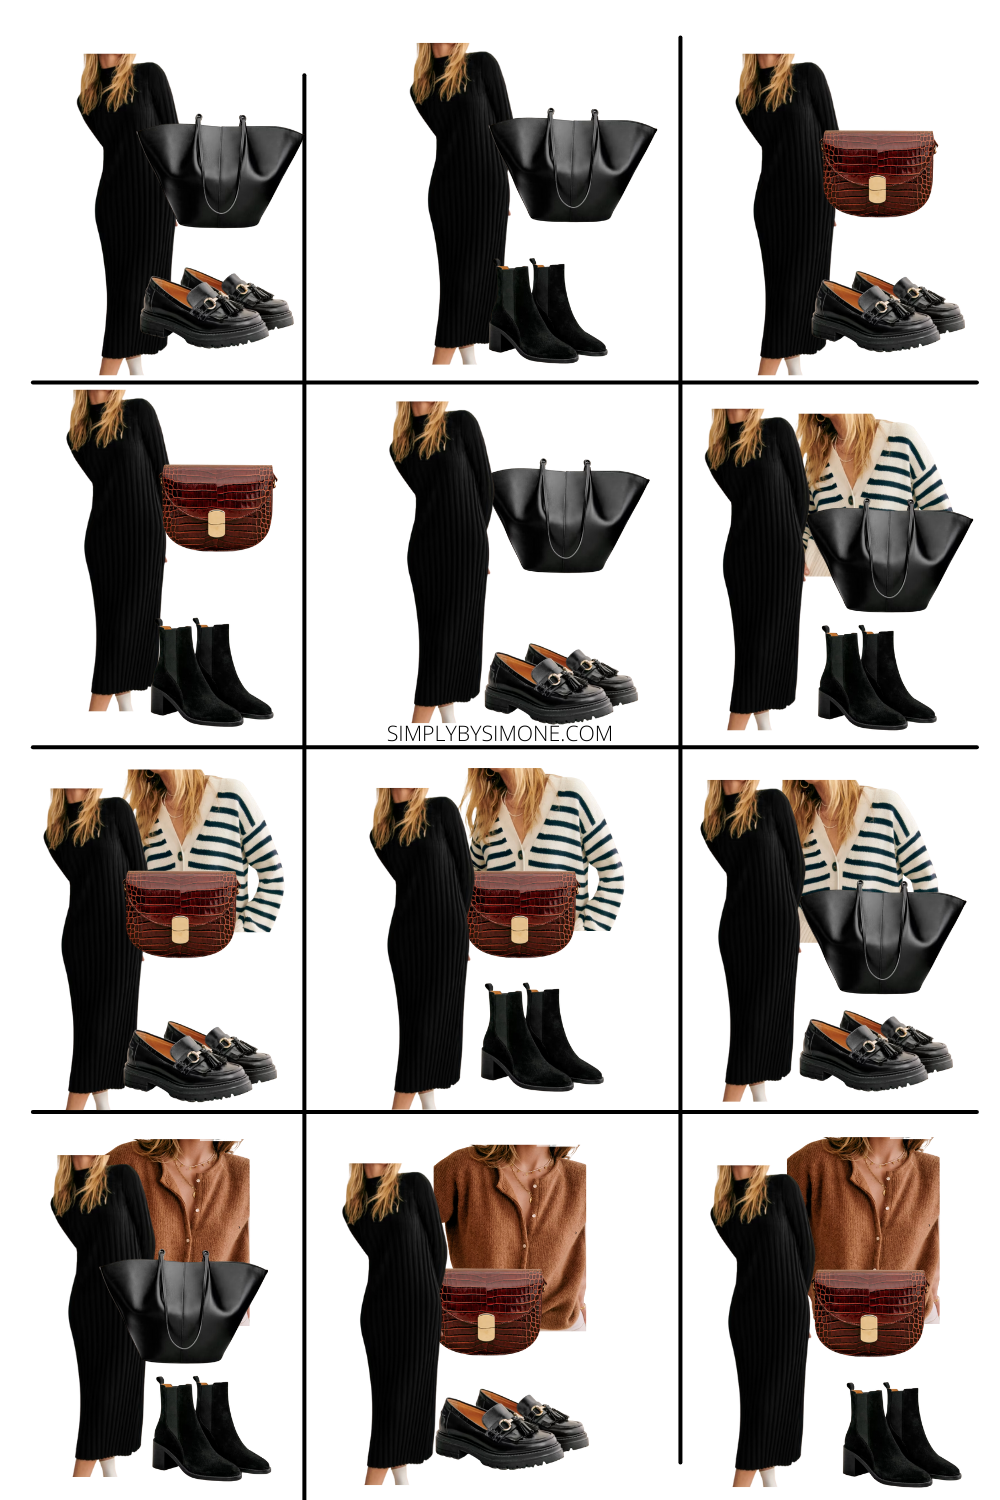 Affordable Sezane Fall Capsule Wardrobe | 12 Pieces, 48 Outfits | How to Build a Capsule Wardrobe | Sezane Fall Clothes | Outfit Inspiration | 48 Fall Weather Outfit Ideas | Fall Vacation Packing Guide | Sezane Fall Capsule Wardrobe - What To Wear This Fall 2023, Parisian Outfit Ideas | Looks 37-48 | Simply by Simone